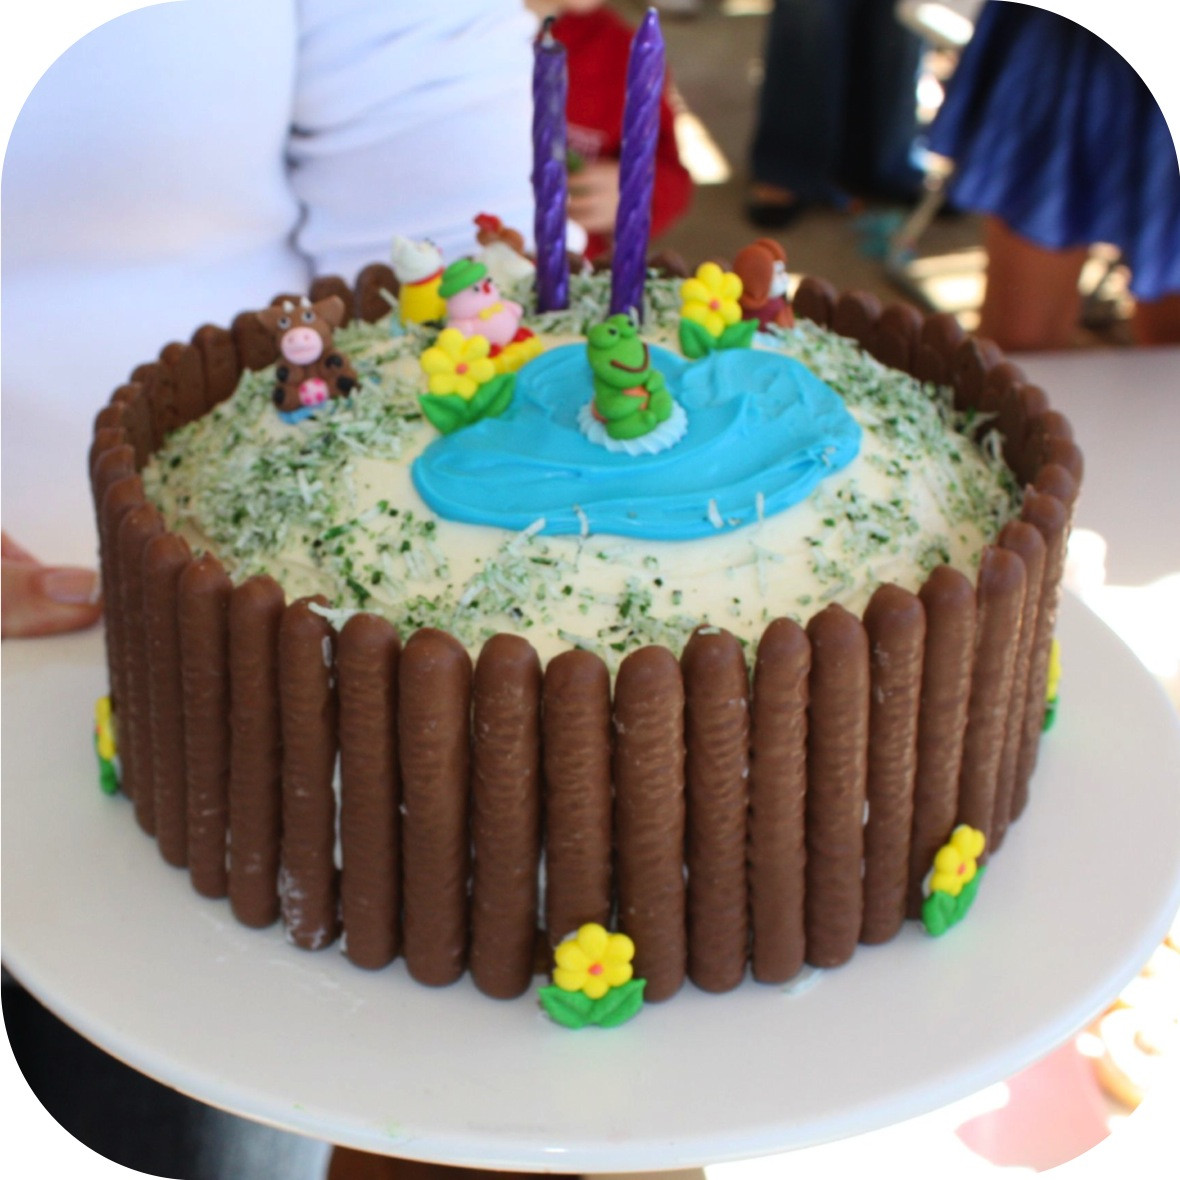 Cool Birthday Cake
 20 Perfect and Lovely Cakes for Your Kids Page 17 of 37